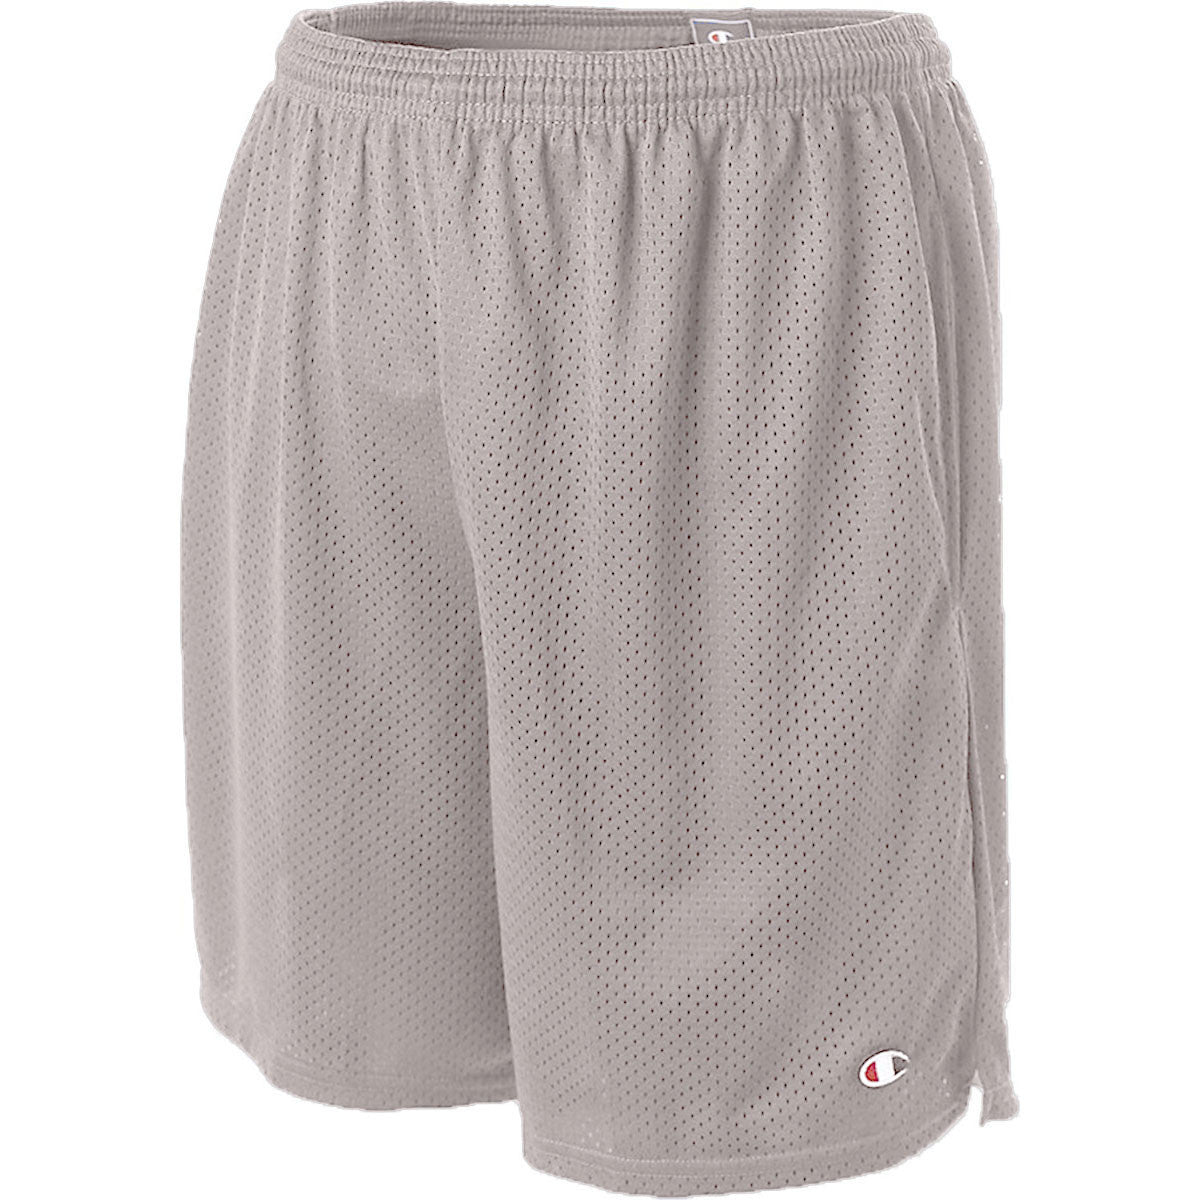 Champion Men's Grey 3.7-Ounce Mesh Short with Pockets